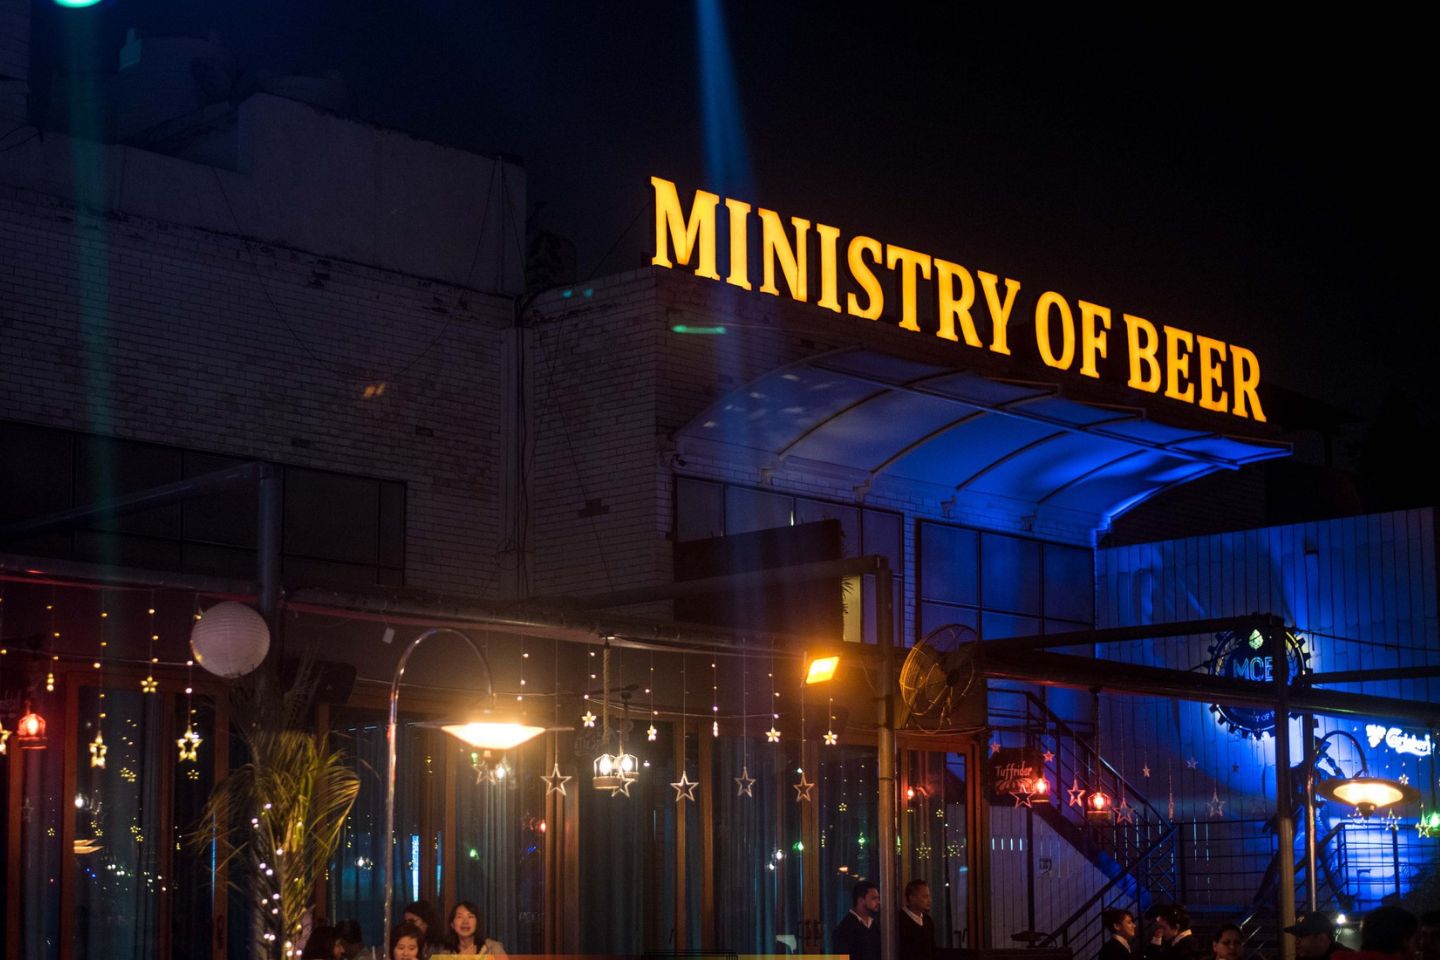 Ministry Of Beer